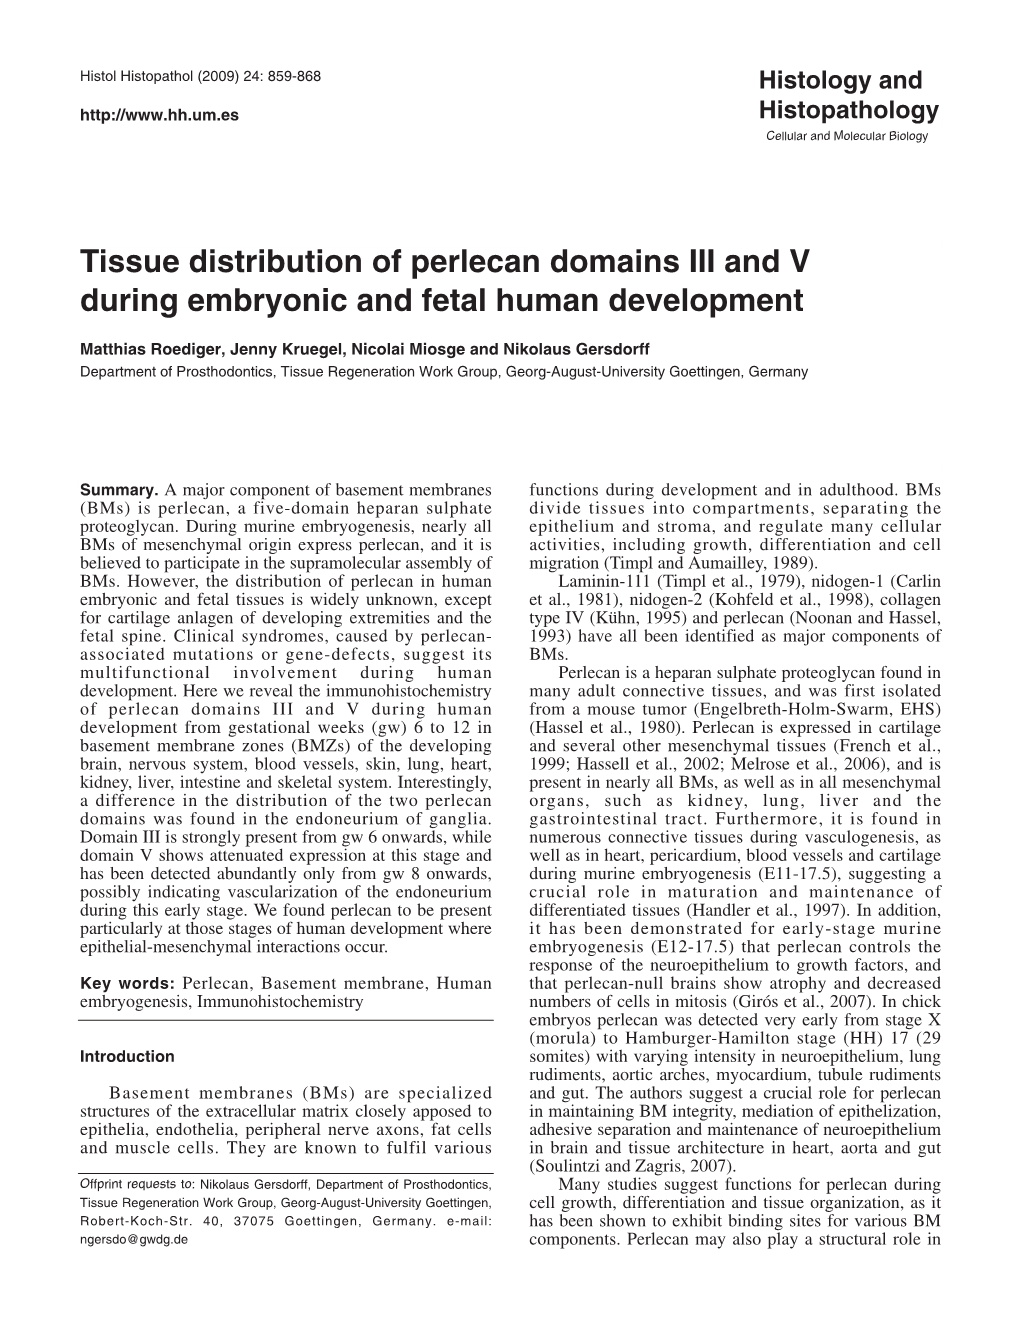 Tissue Distribution of Perlecan Domains III and V During Embryonic and Fetal Human Development